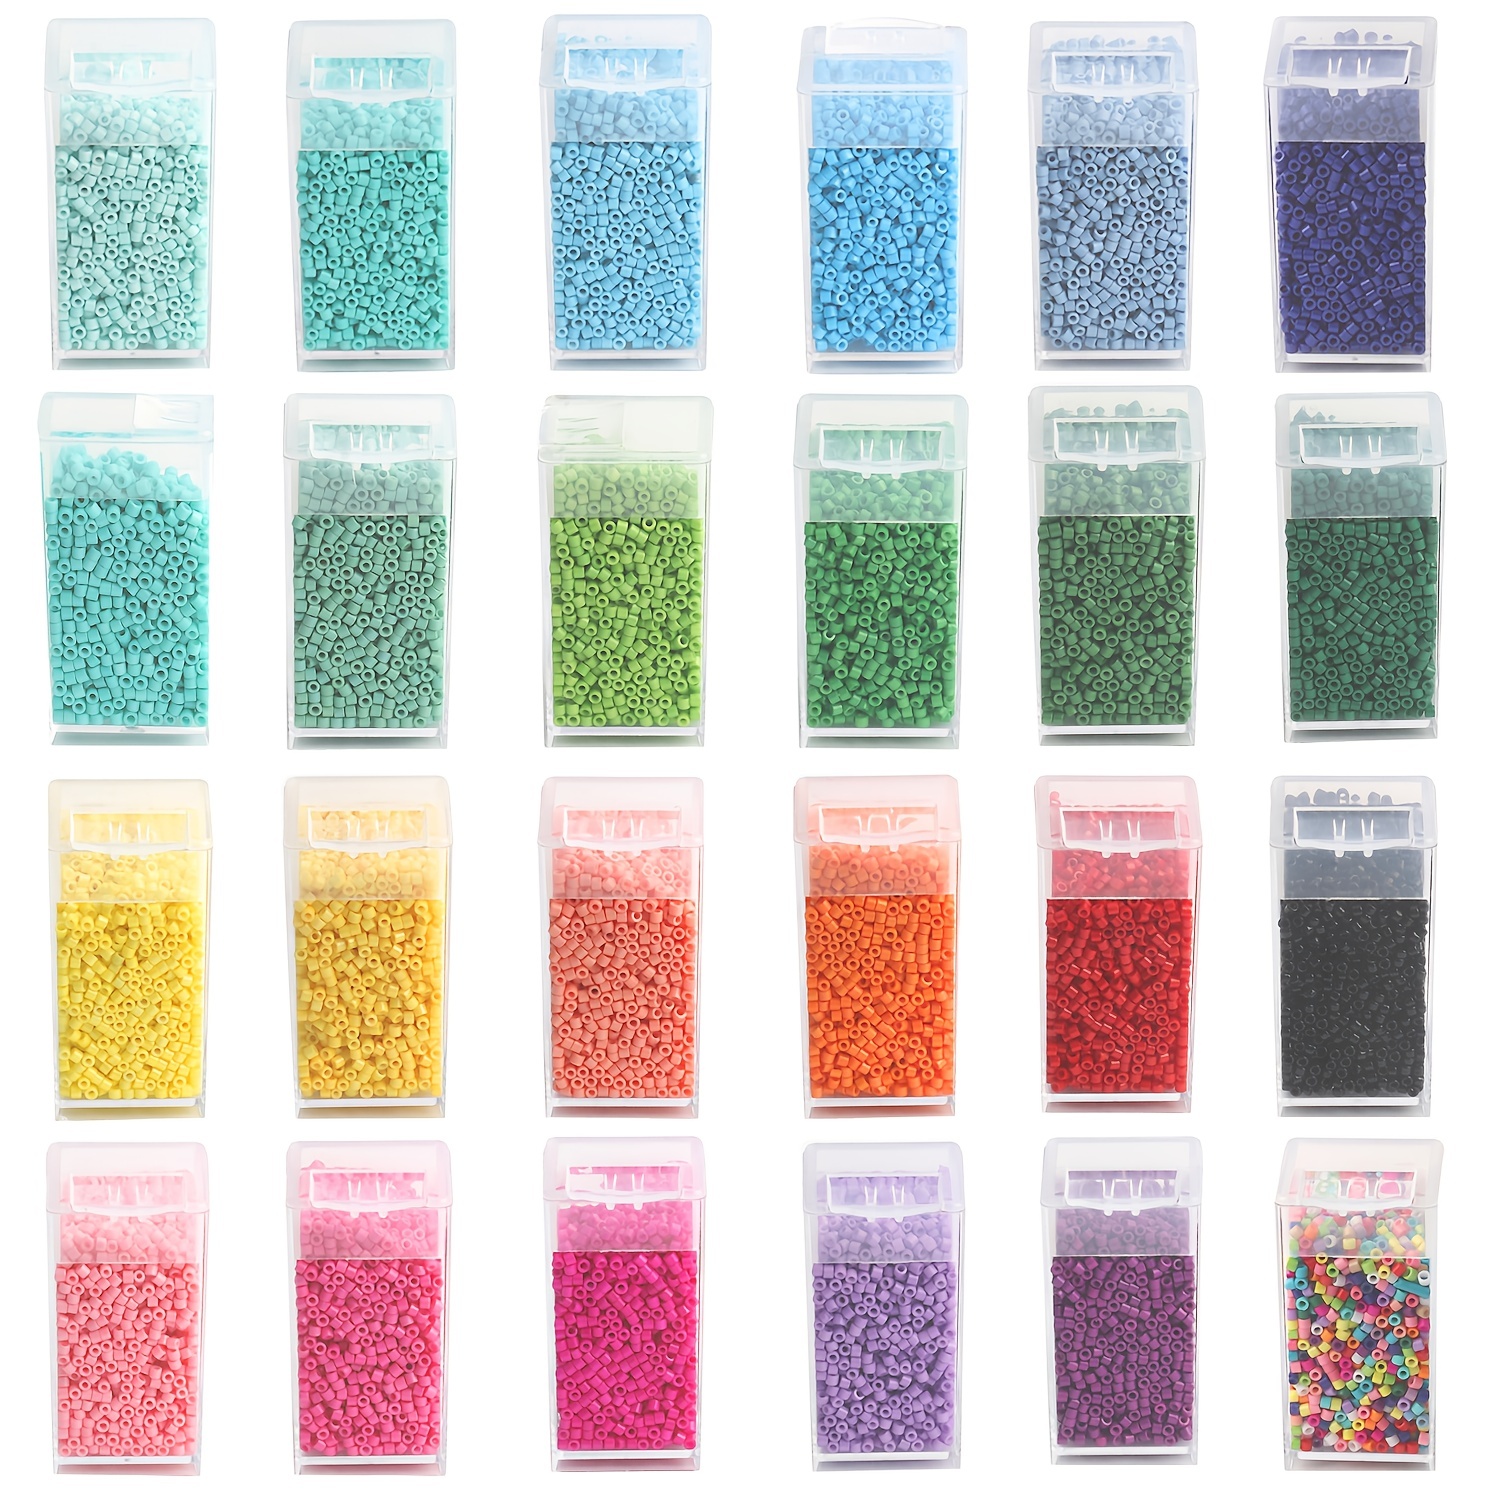  3000 Pcs Dark Blue Seed Beads,12/0 Glass Seed Beads in